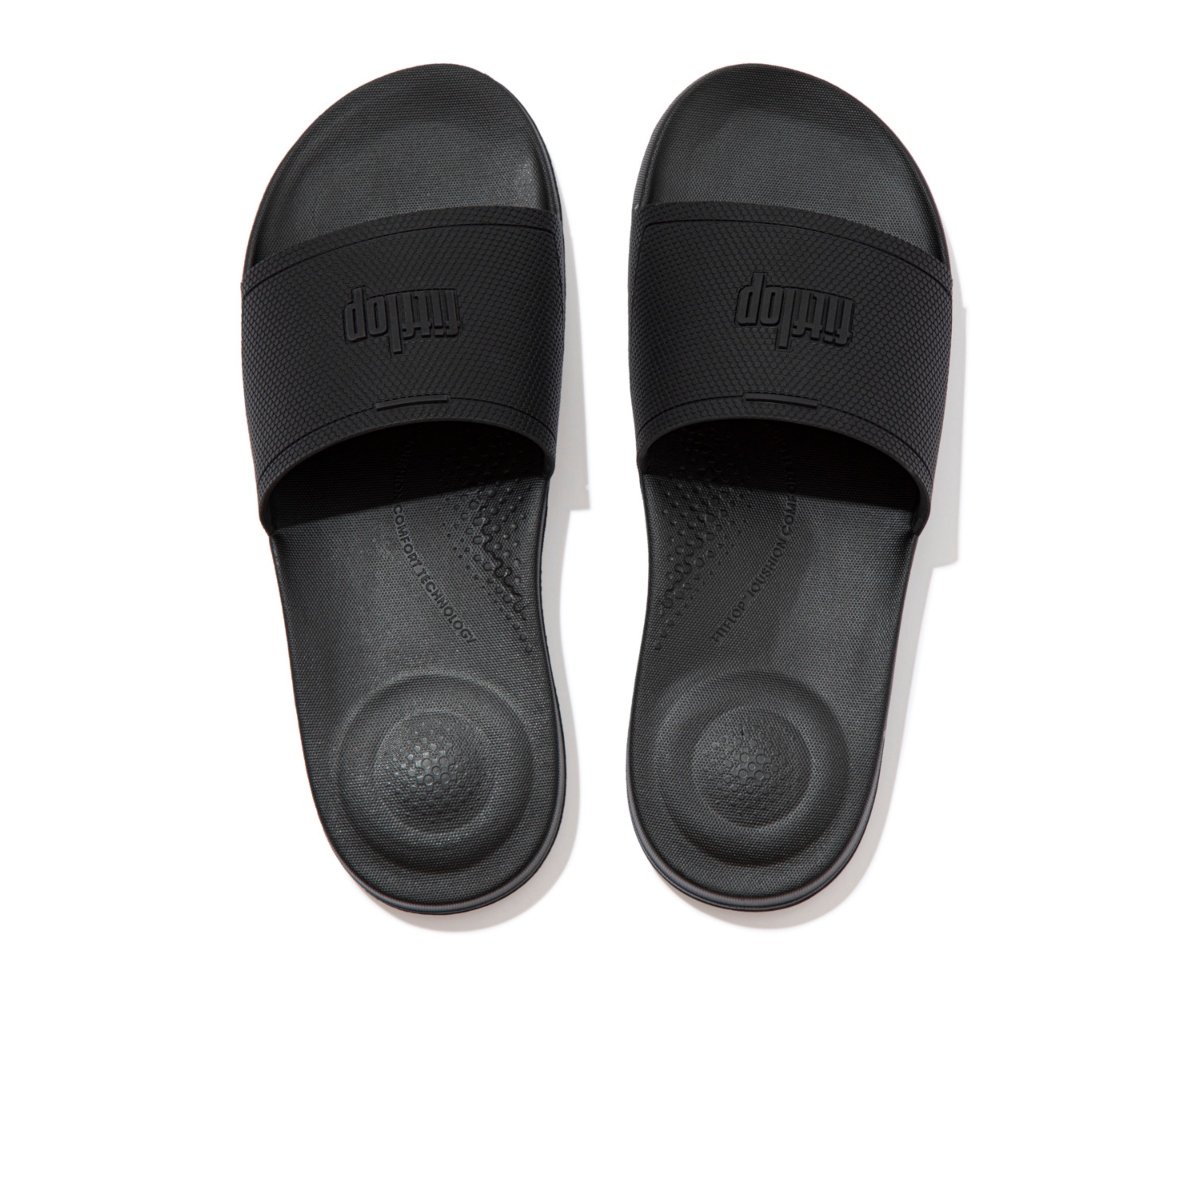 FitFlop iQUSHION Pool Sliders All Black top view